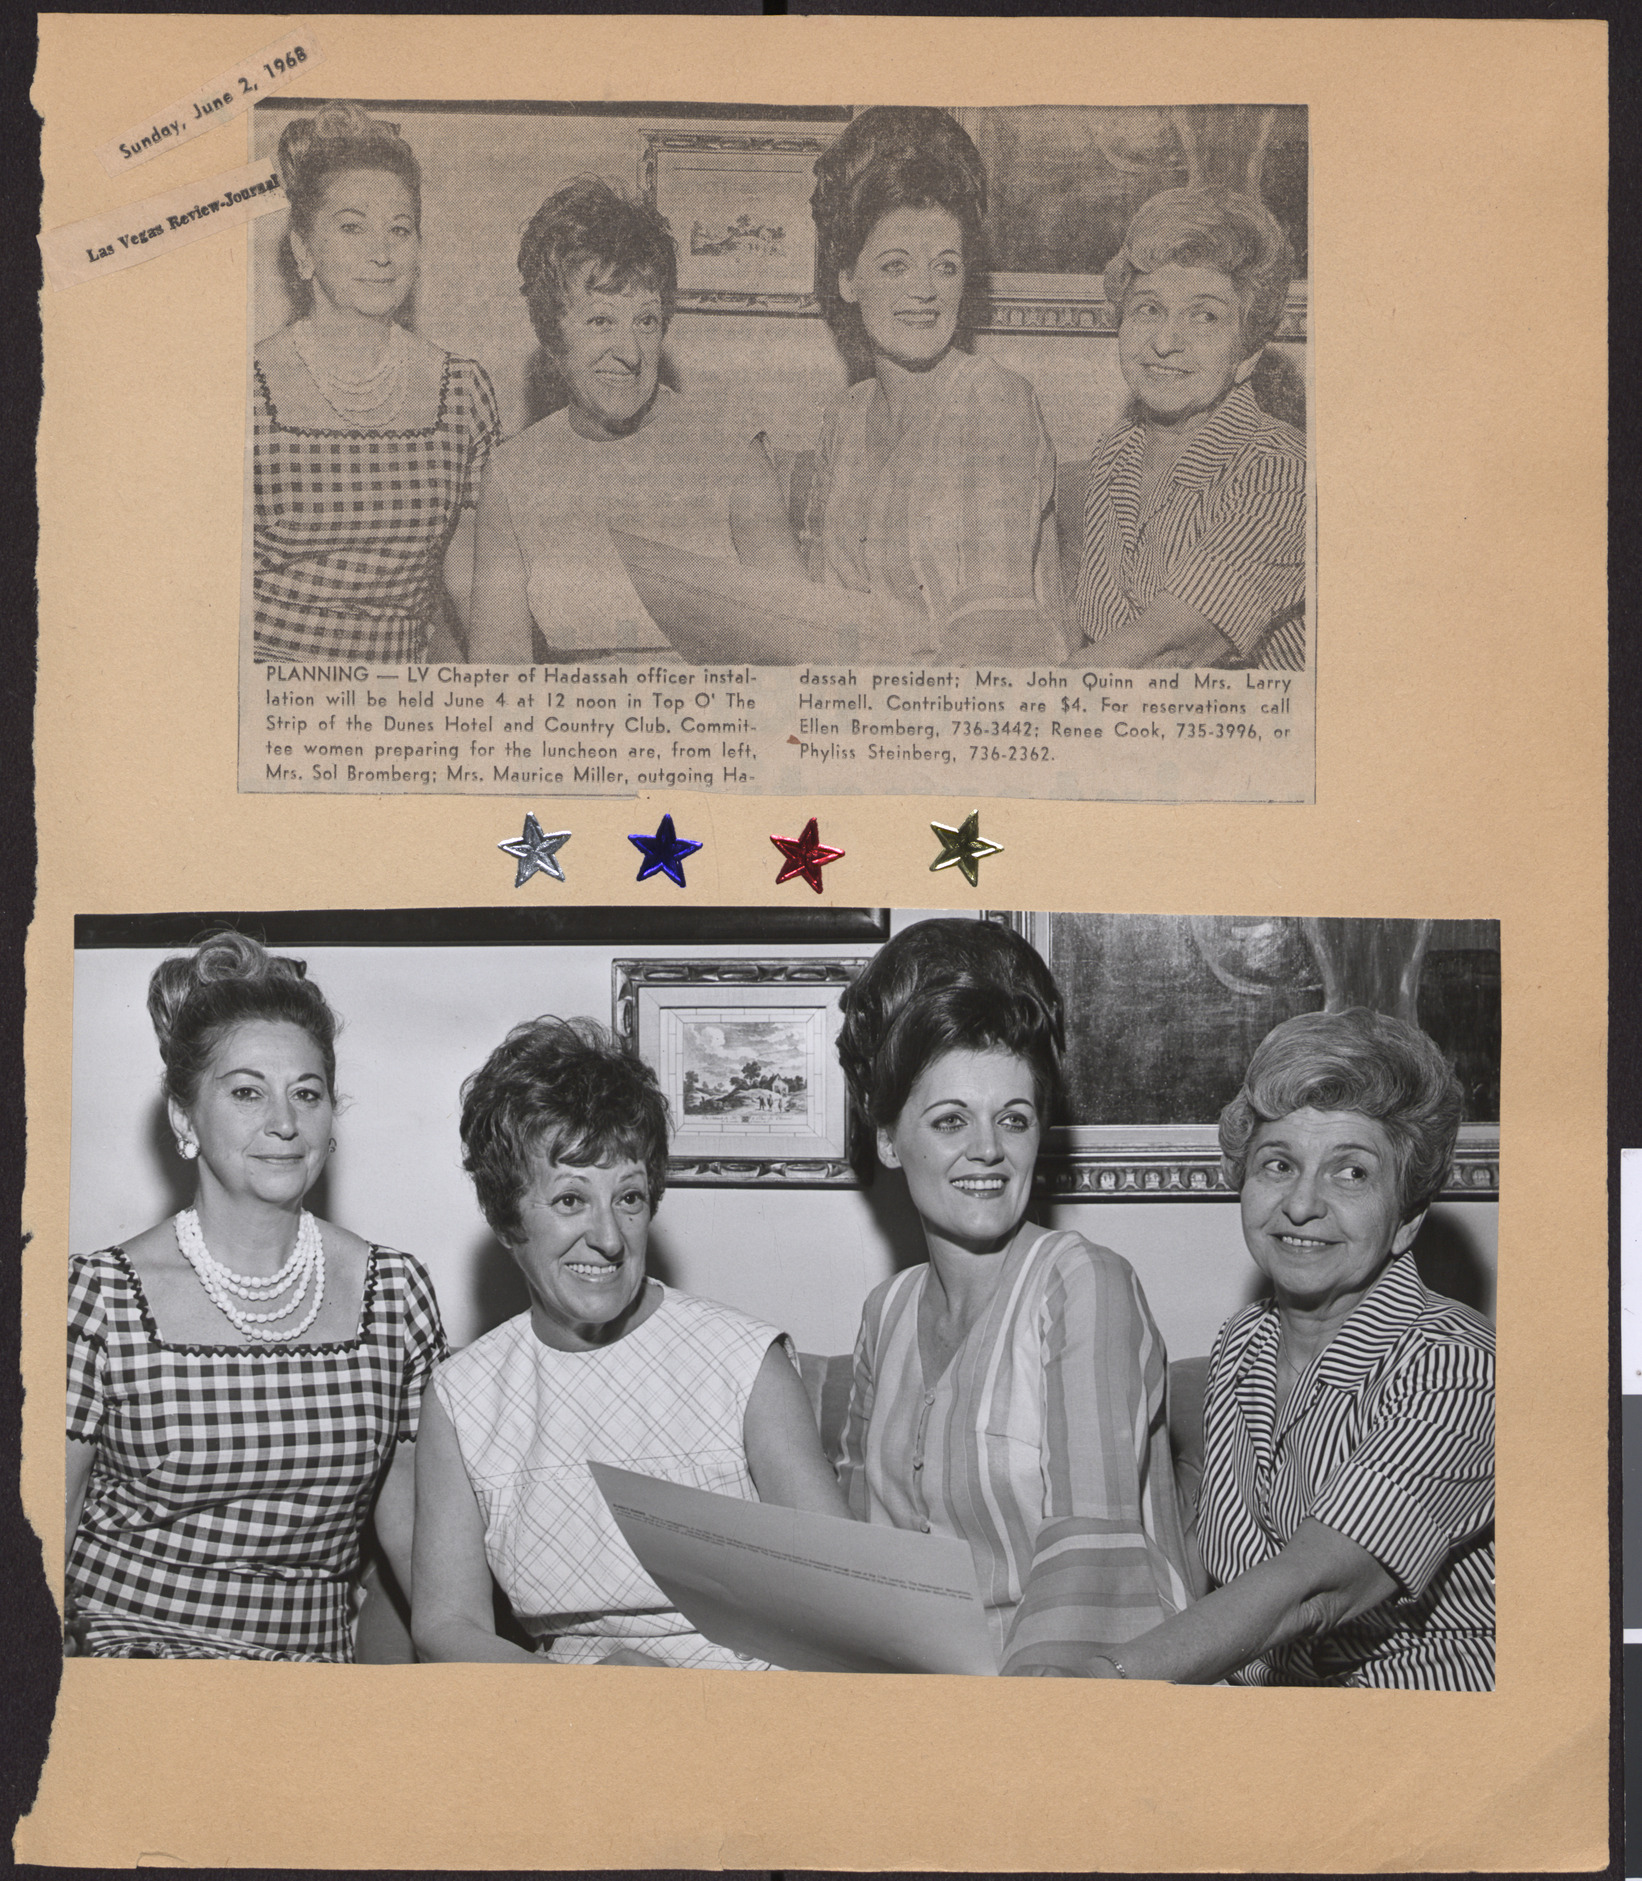 Newspaper clipping, Planning, Las Vegas Review-Journal, June 2, 1968, and photograph of the Hadassah Luncheon Committee